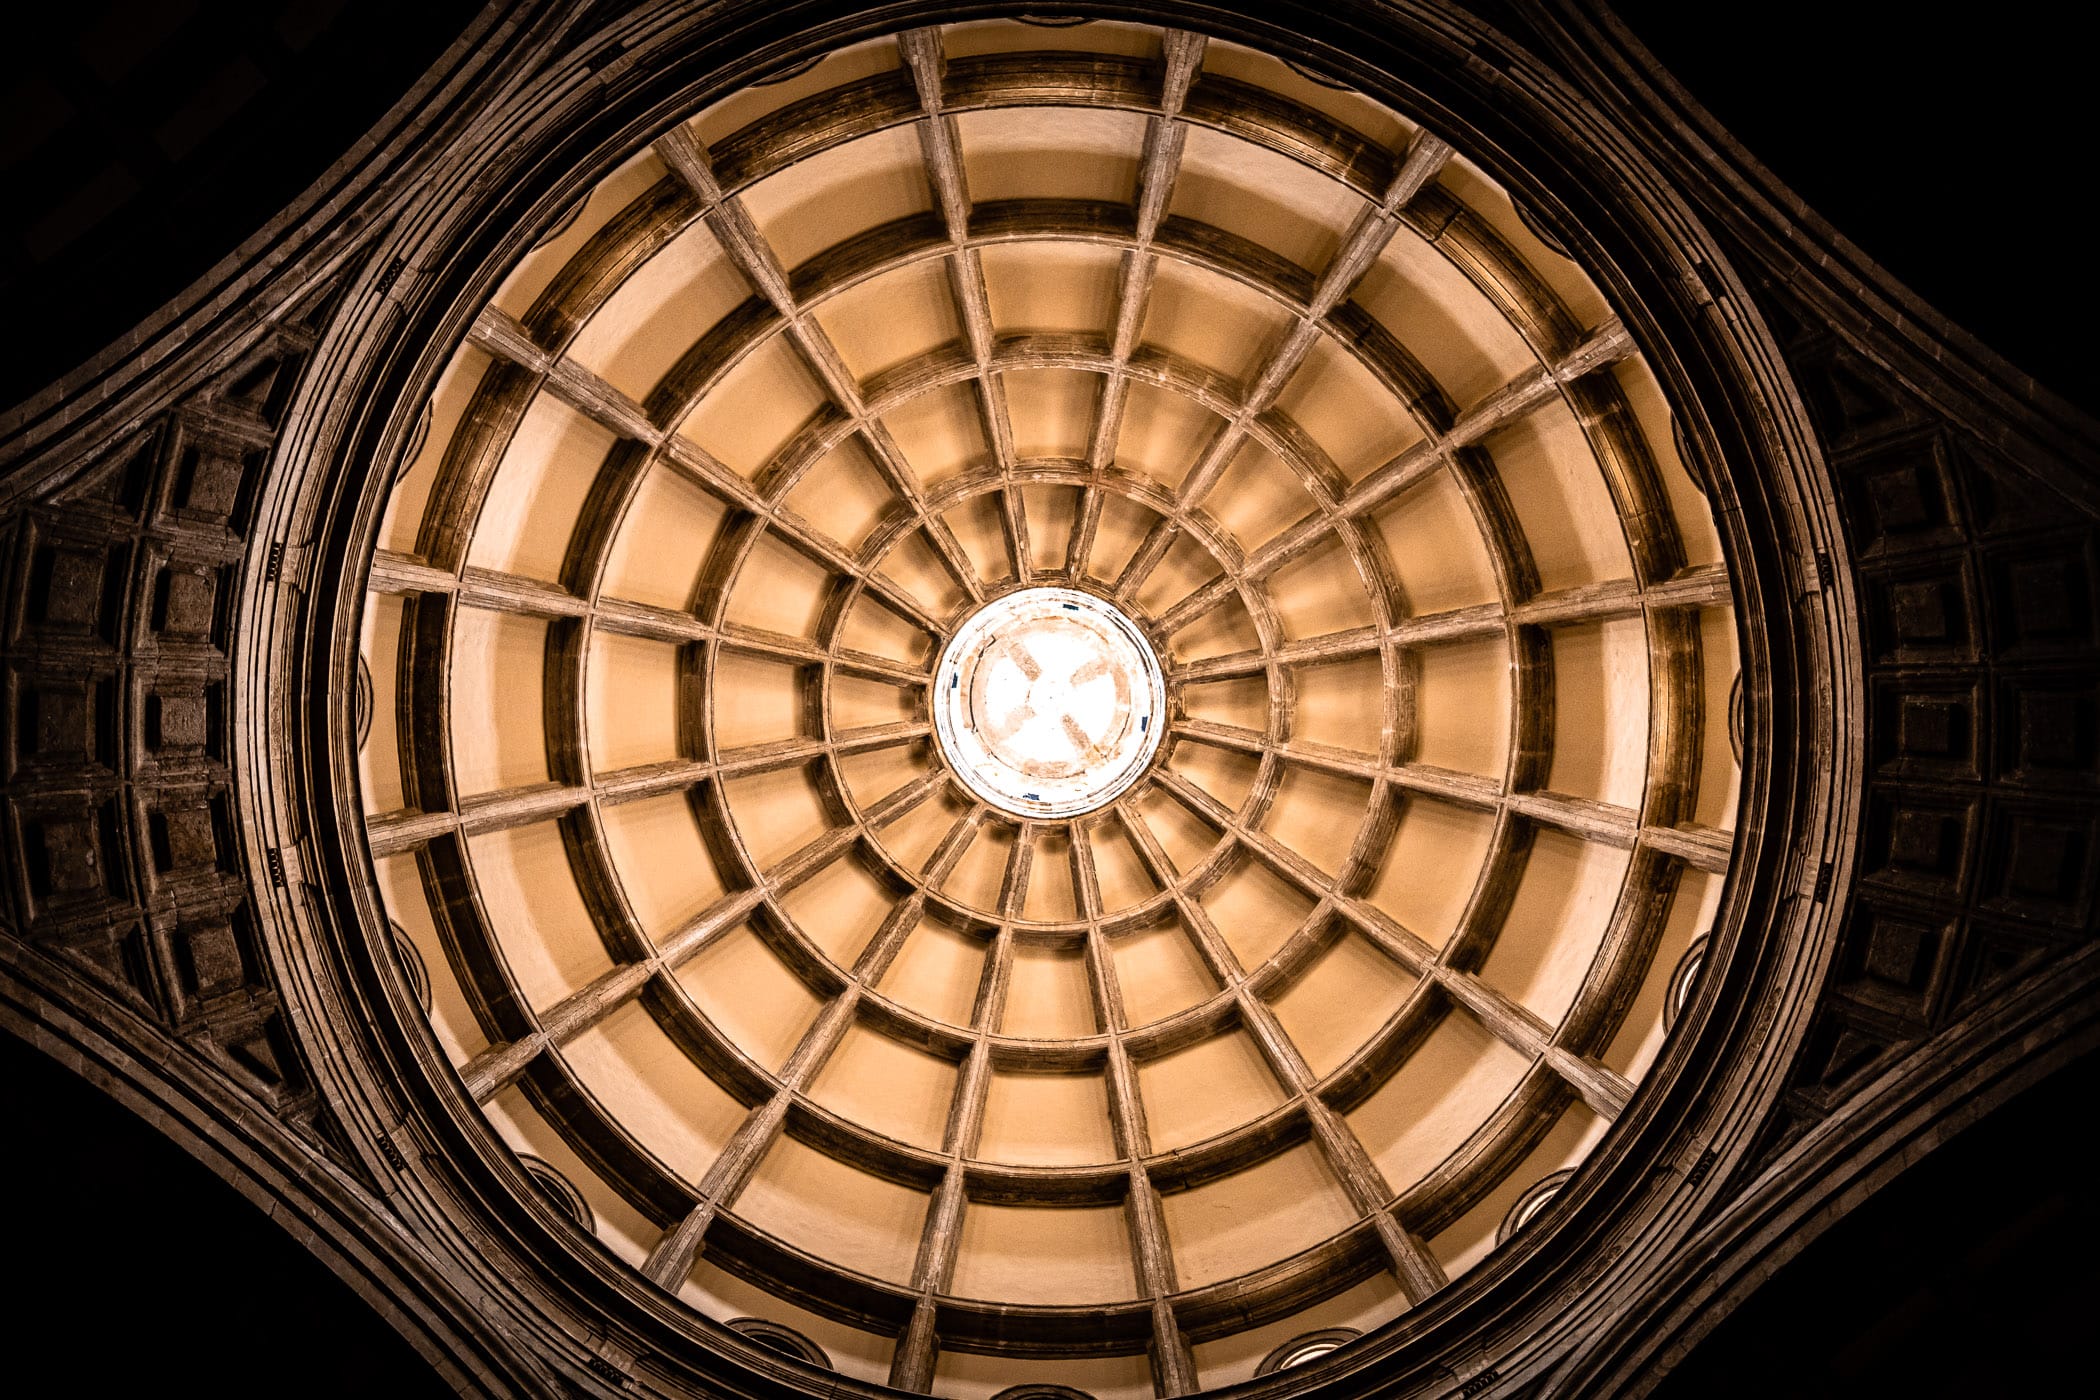 The central oculus of the vaulted ceiling of Catedral de San Ildefonso in Mérida, Mexico